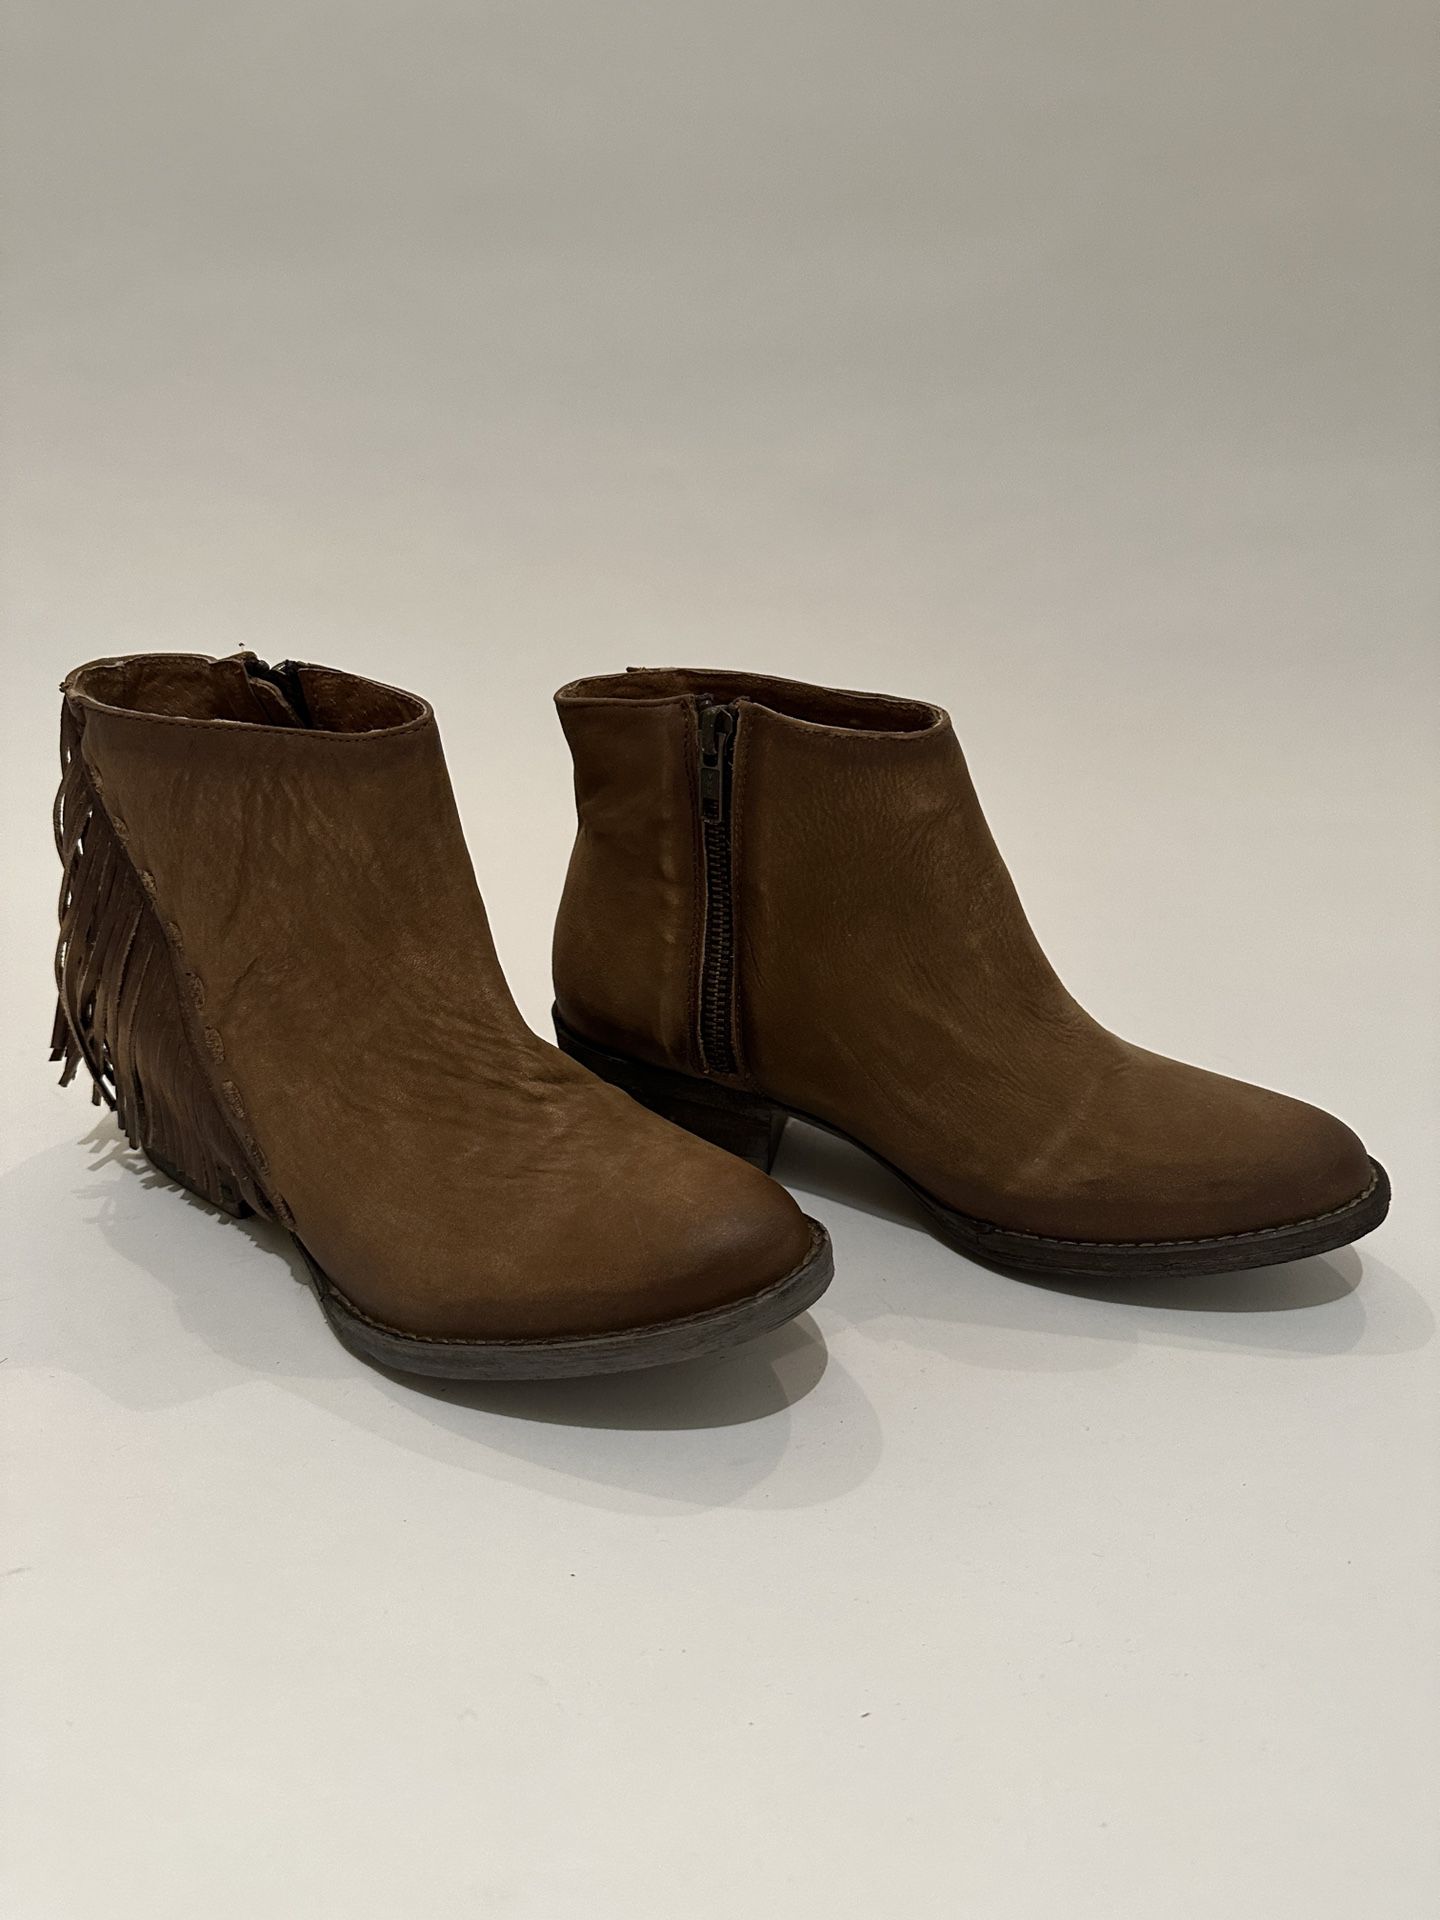 Women’s Boots (size 7)